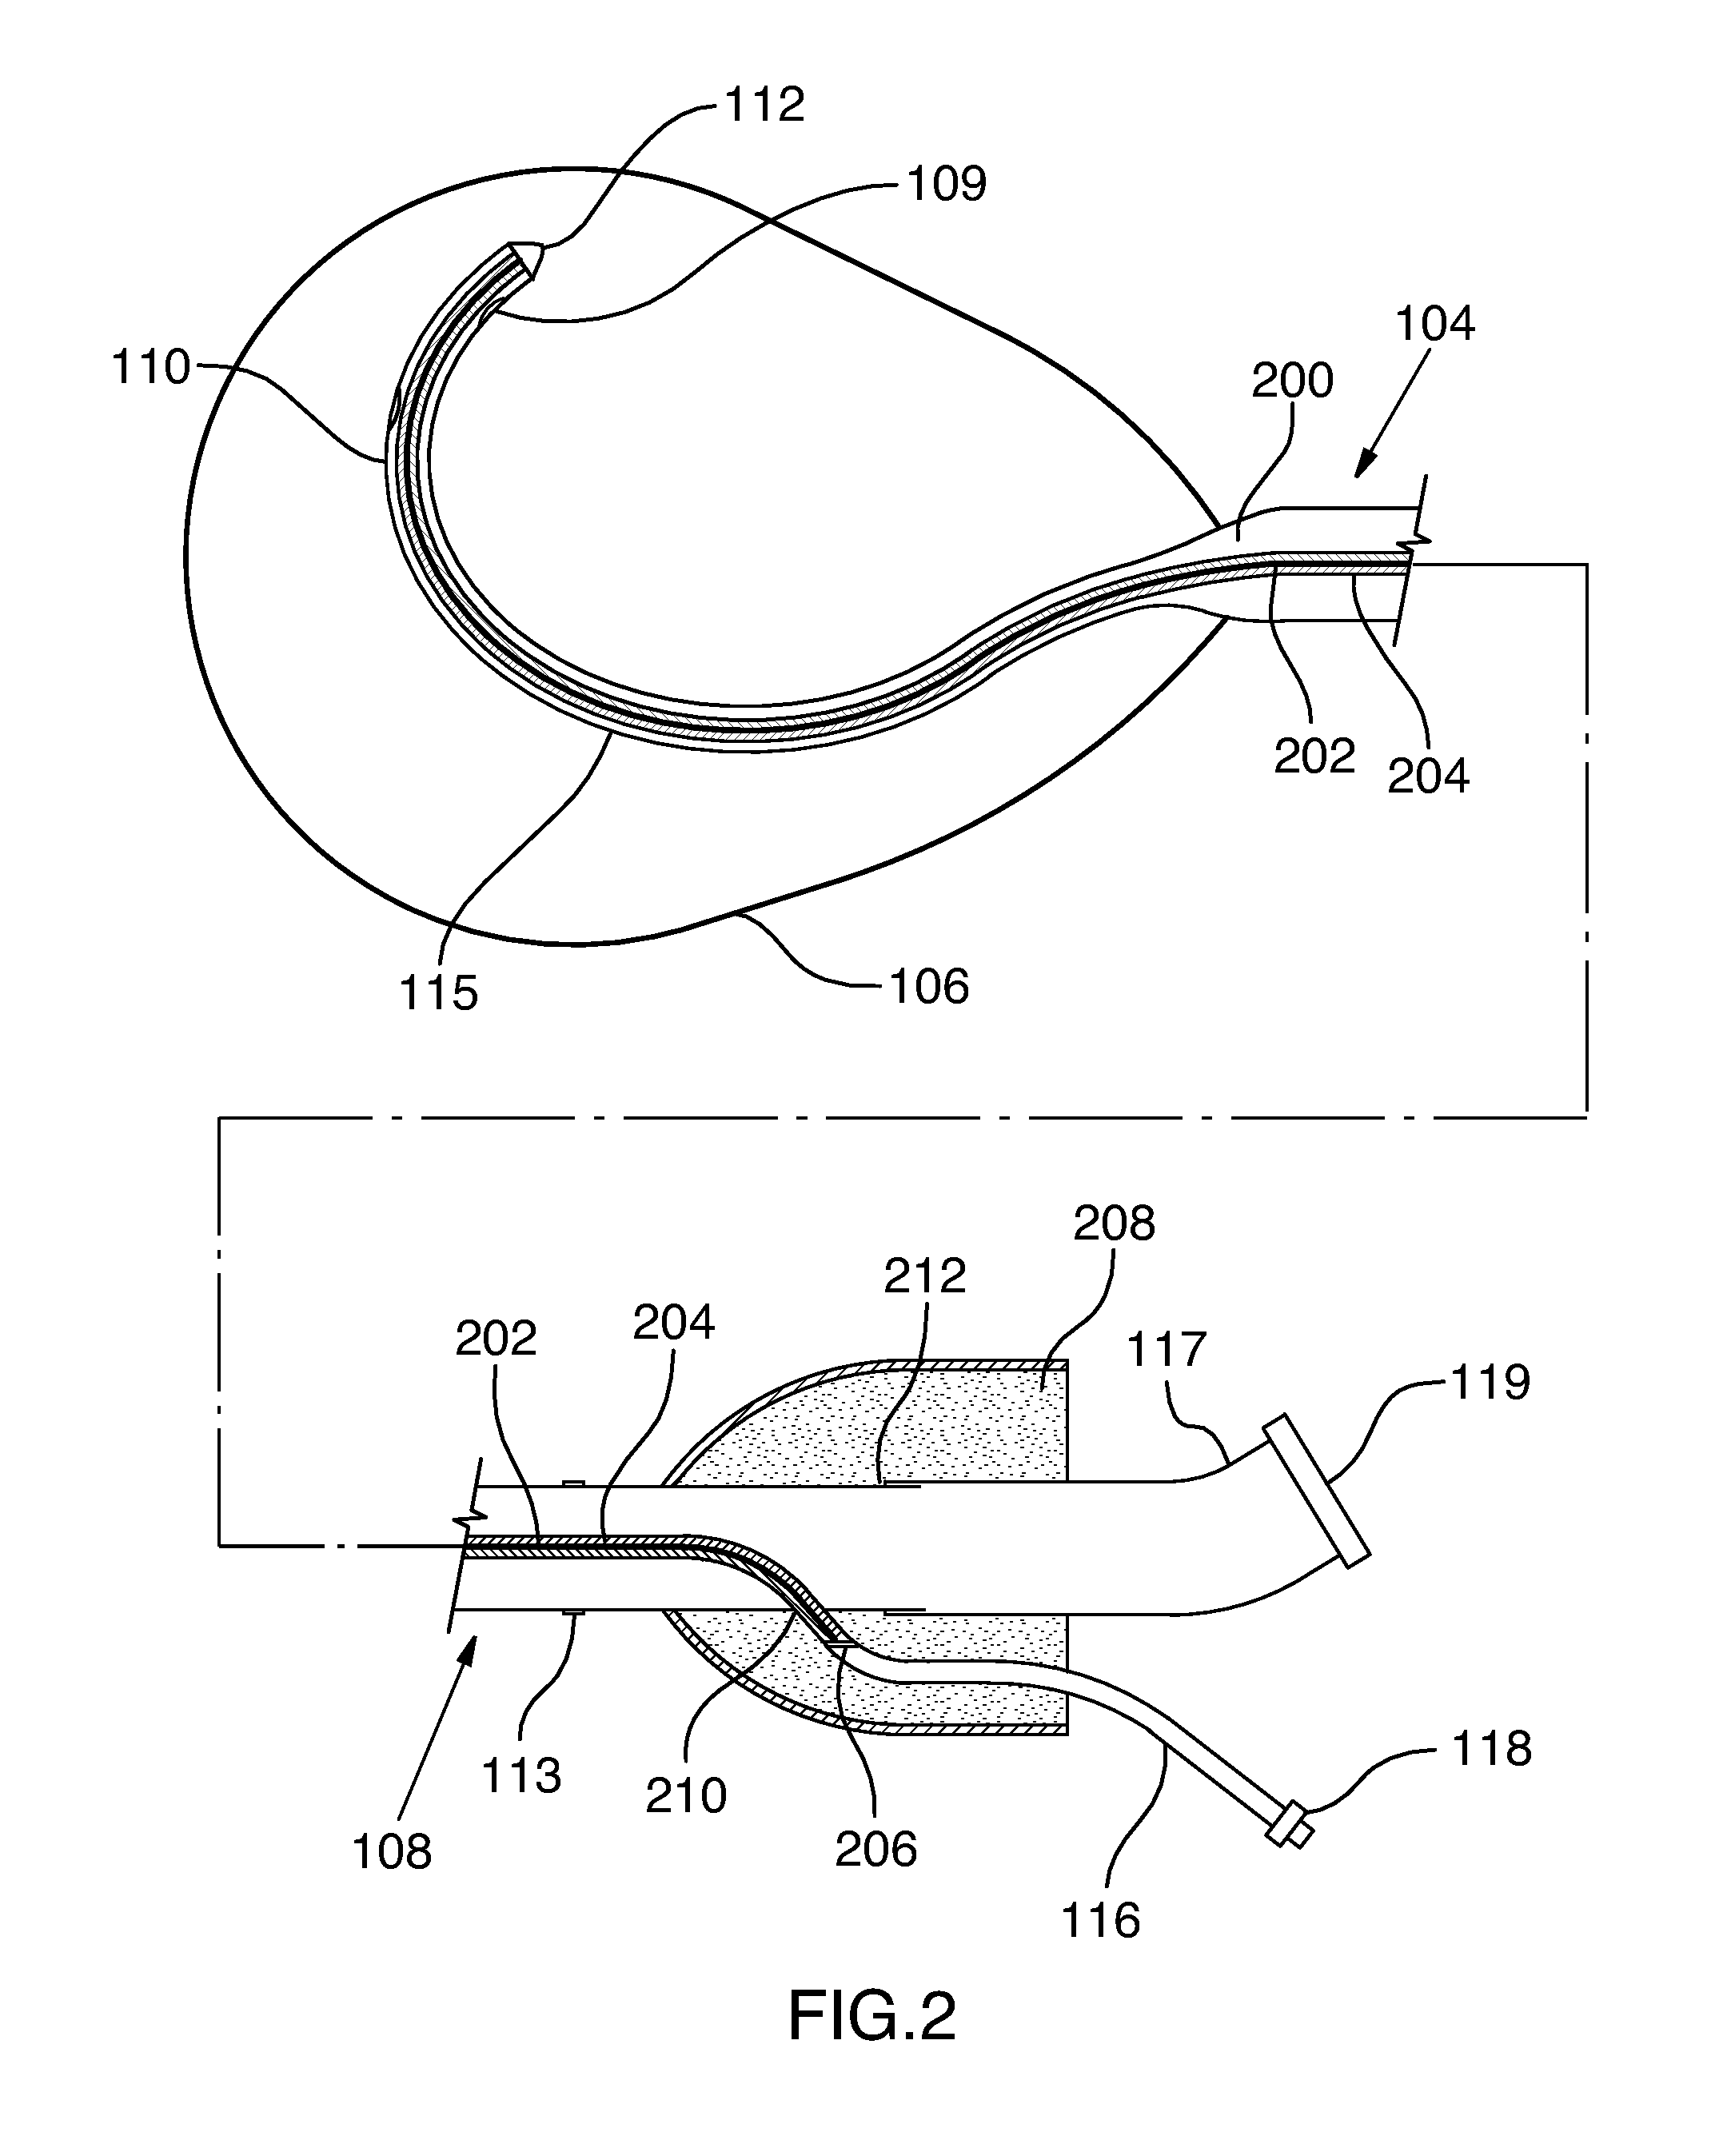 Method of surgical perforation via the delivery of energy